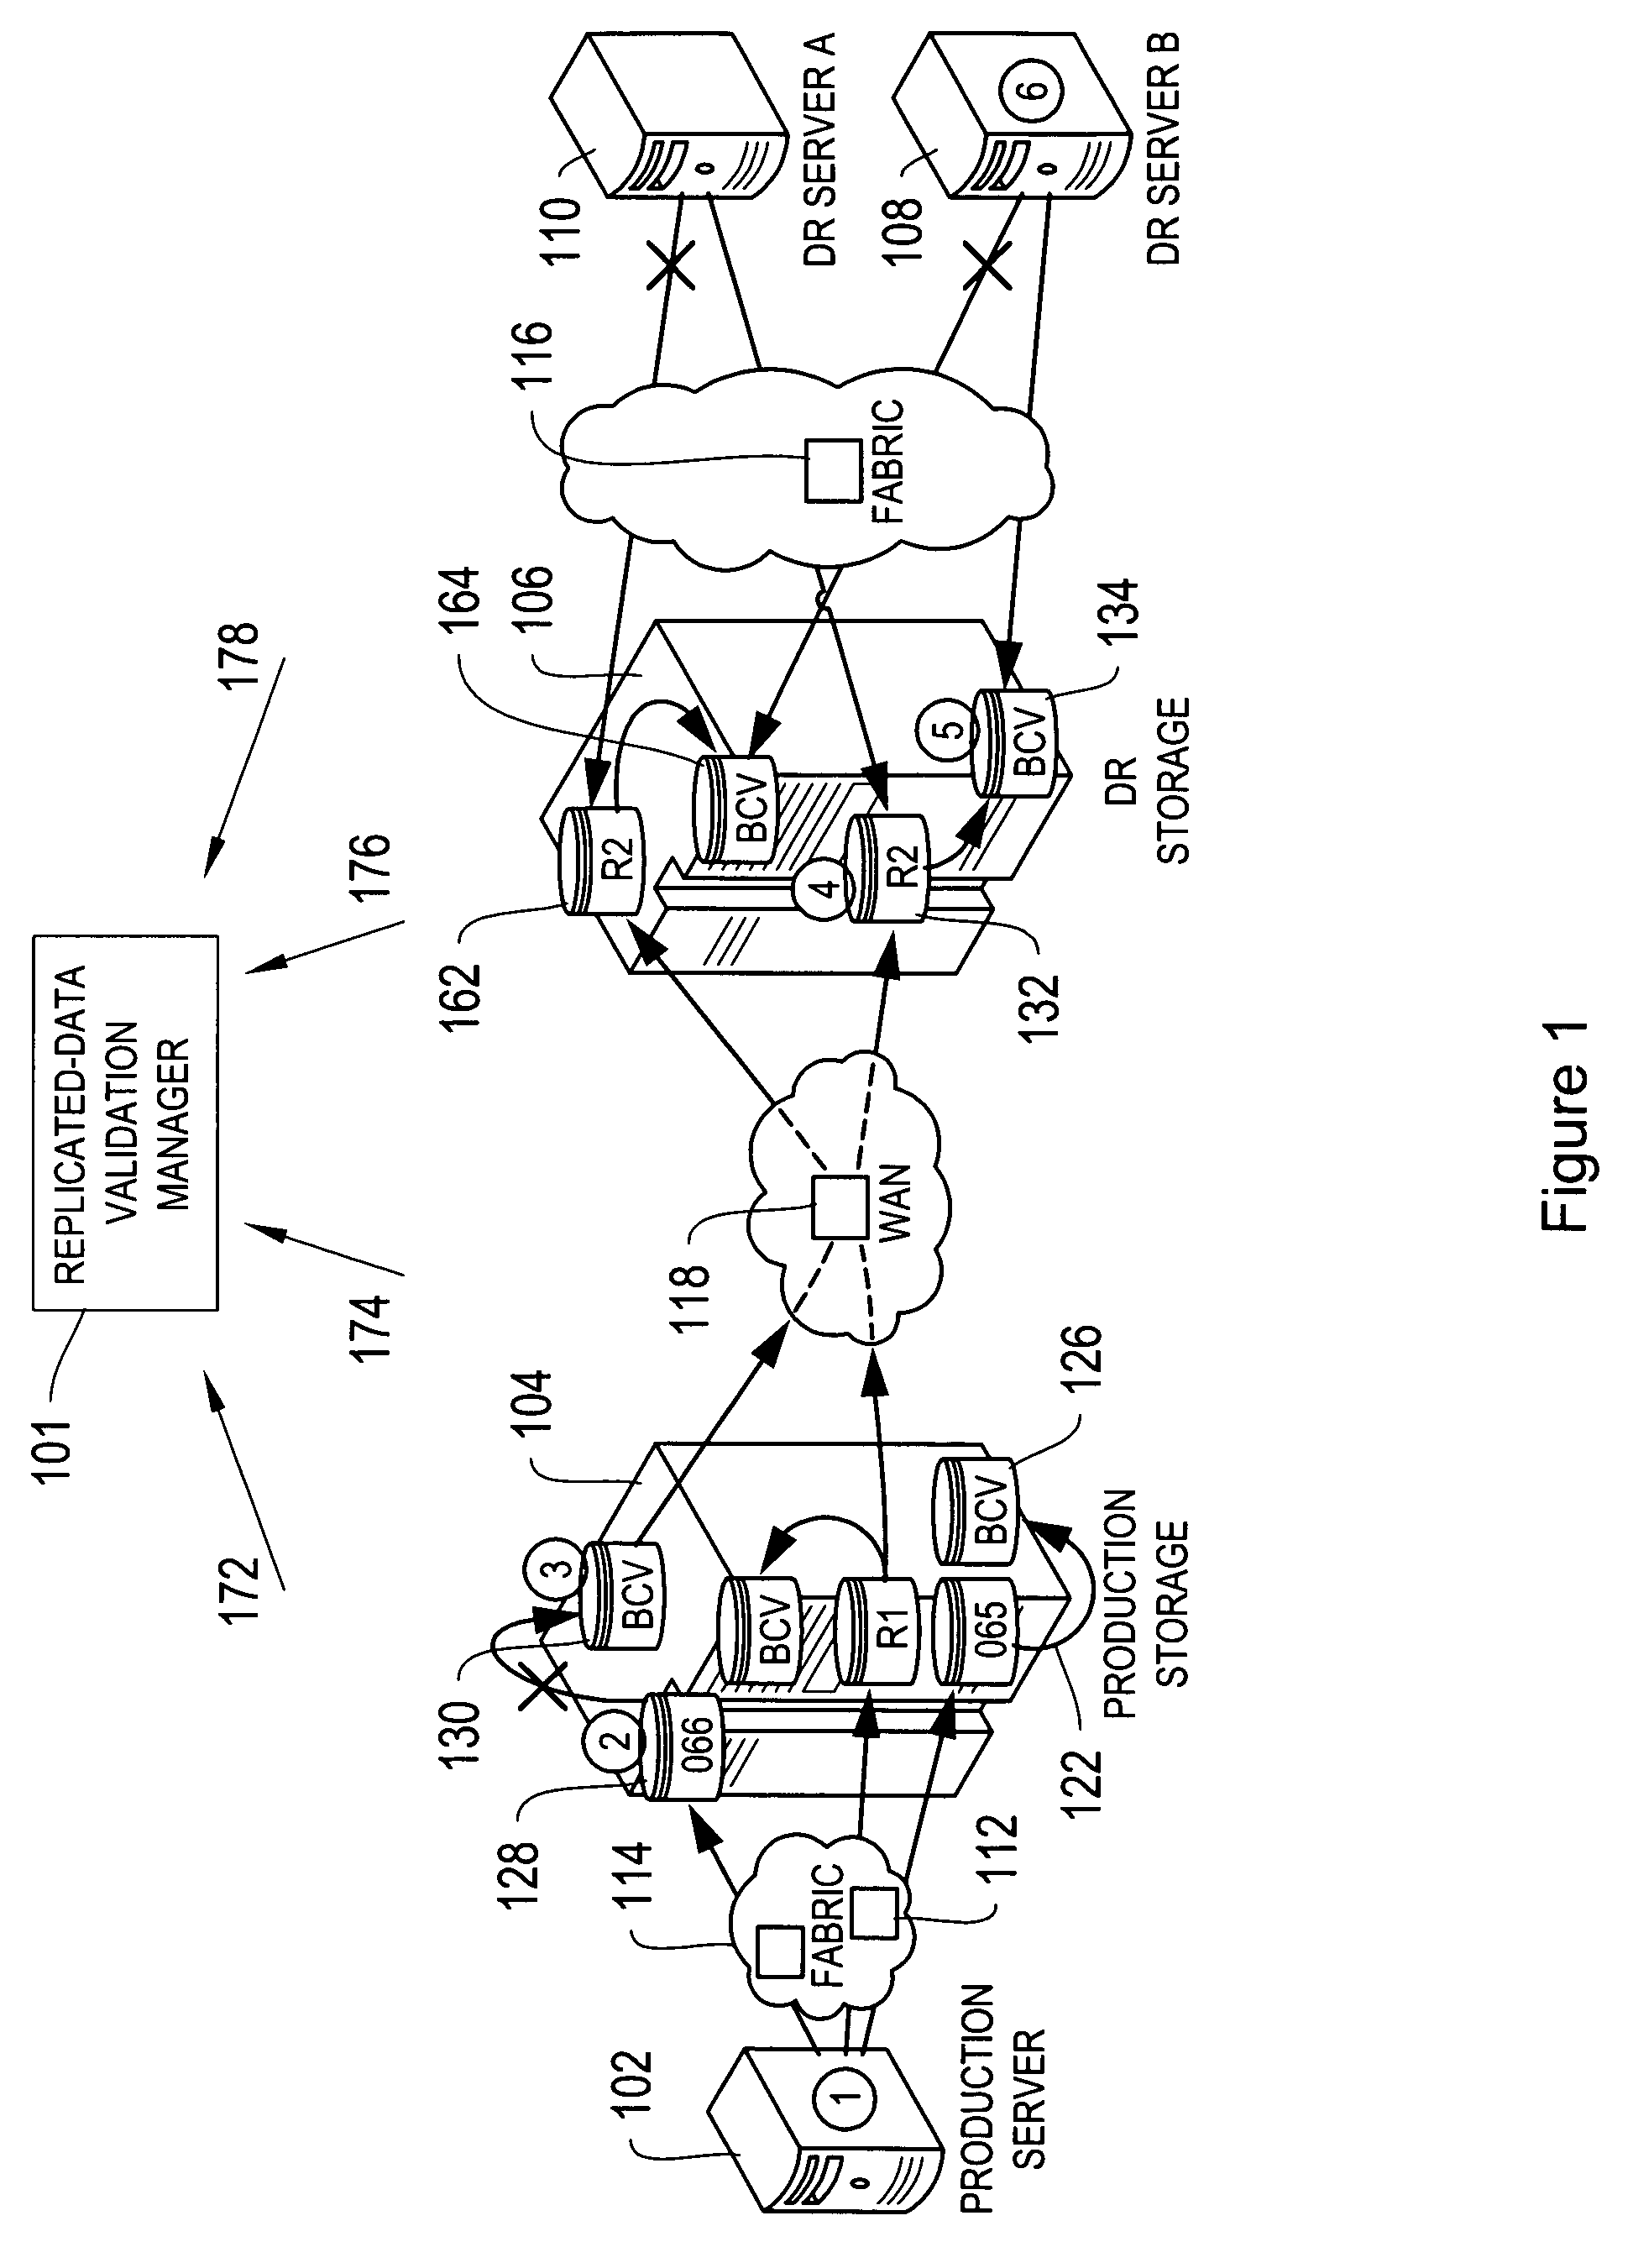 Methods and systems for validating accessibility and currency of replicated data